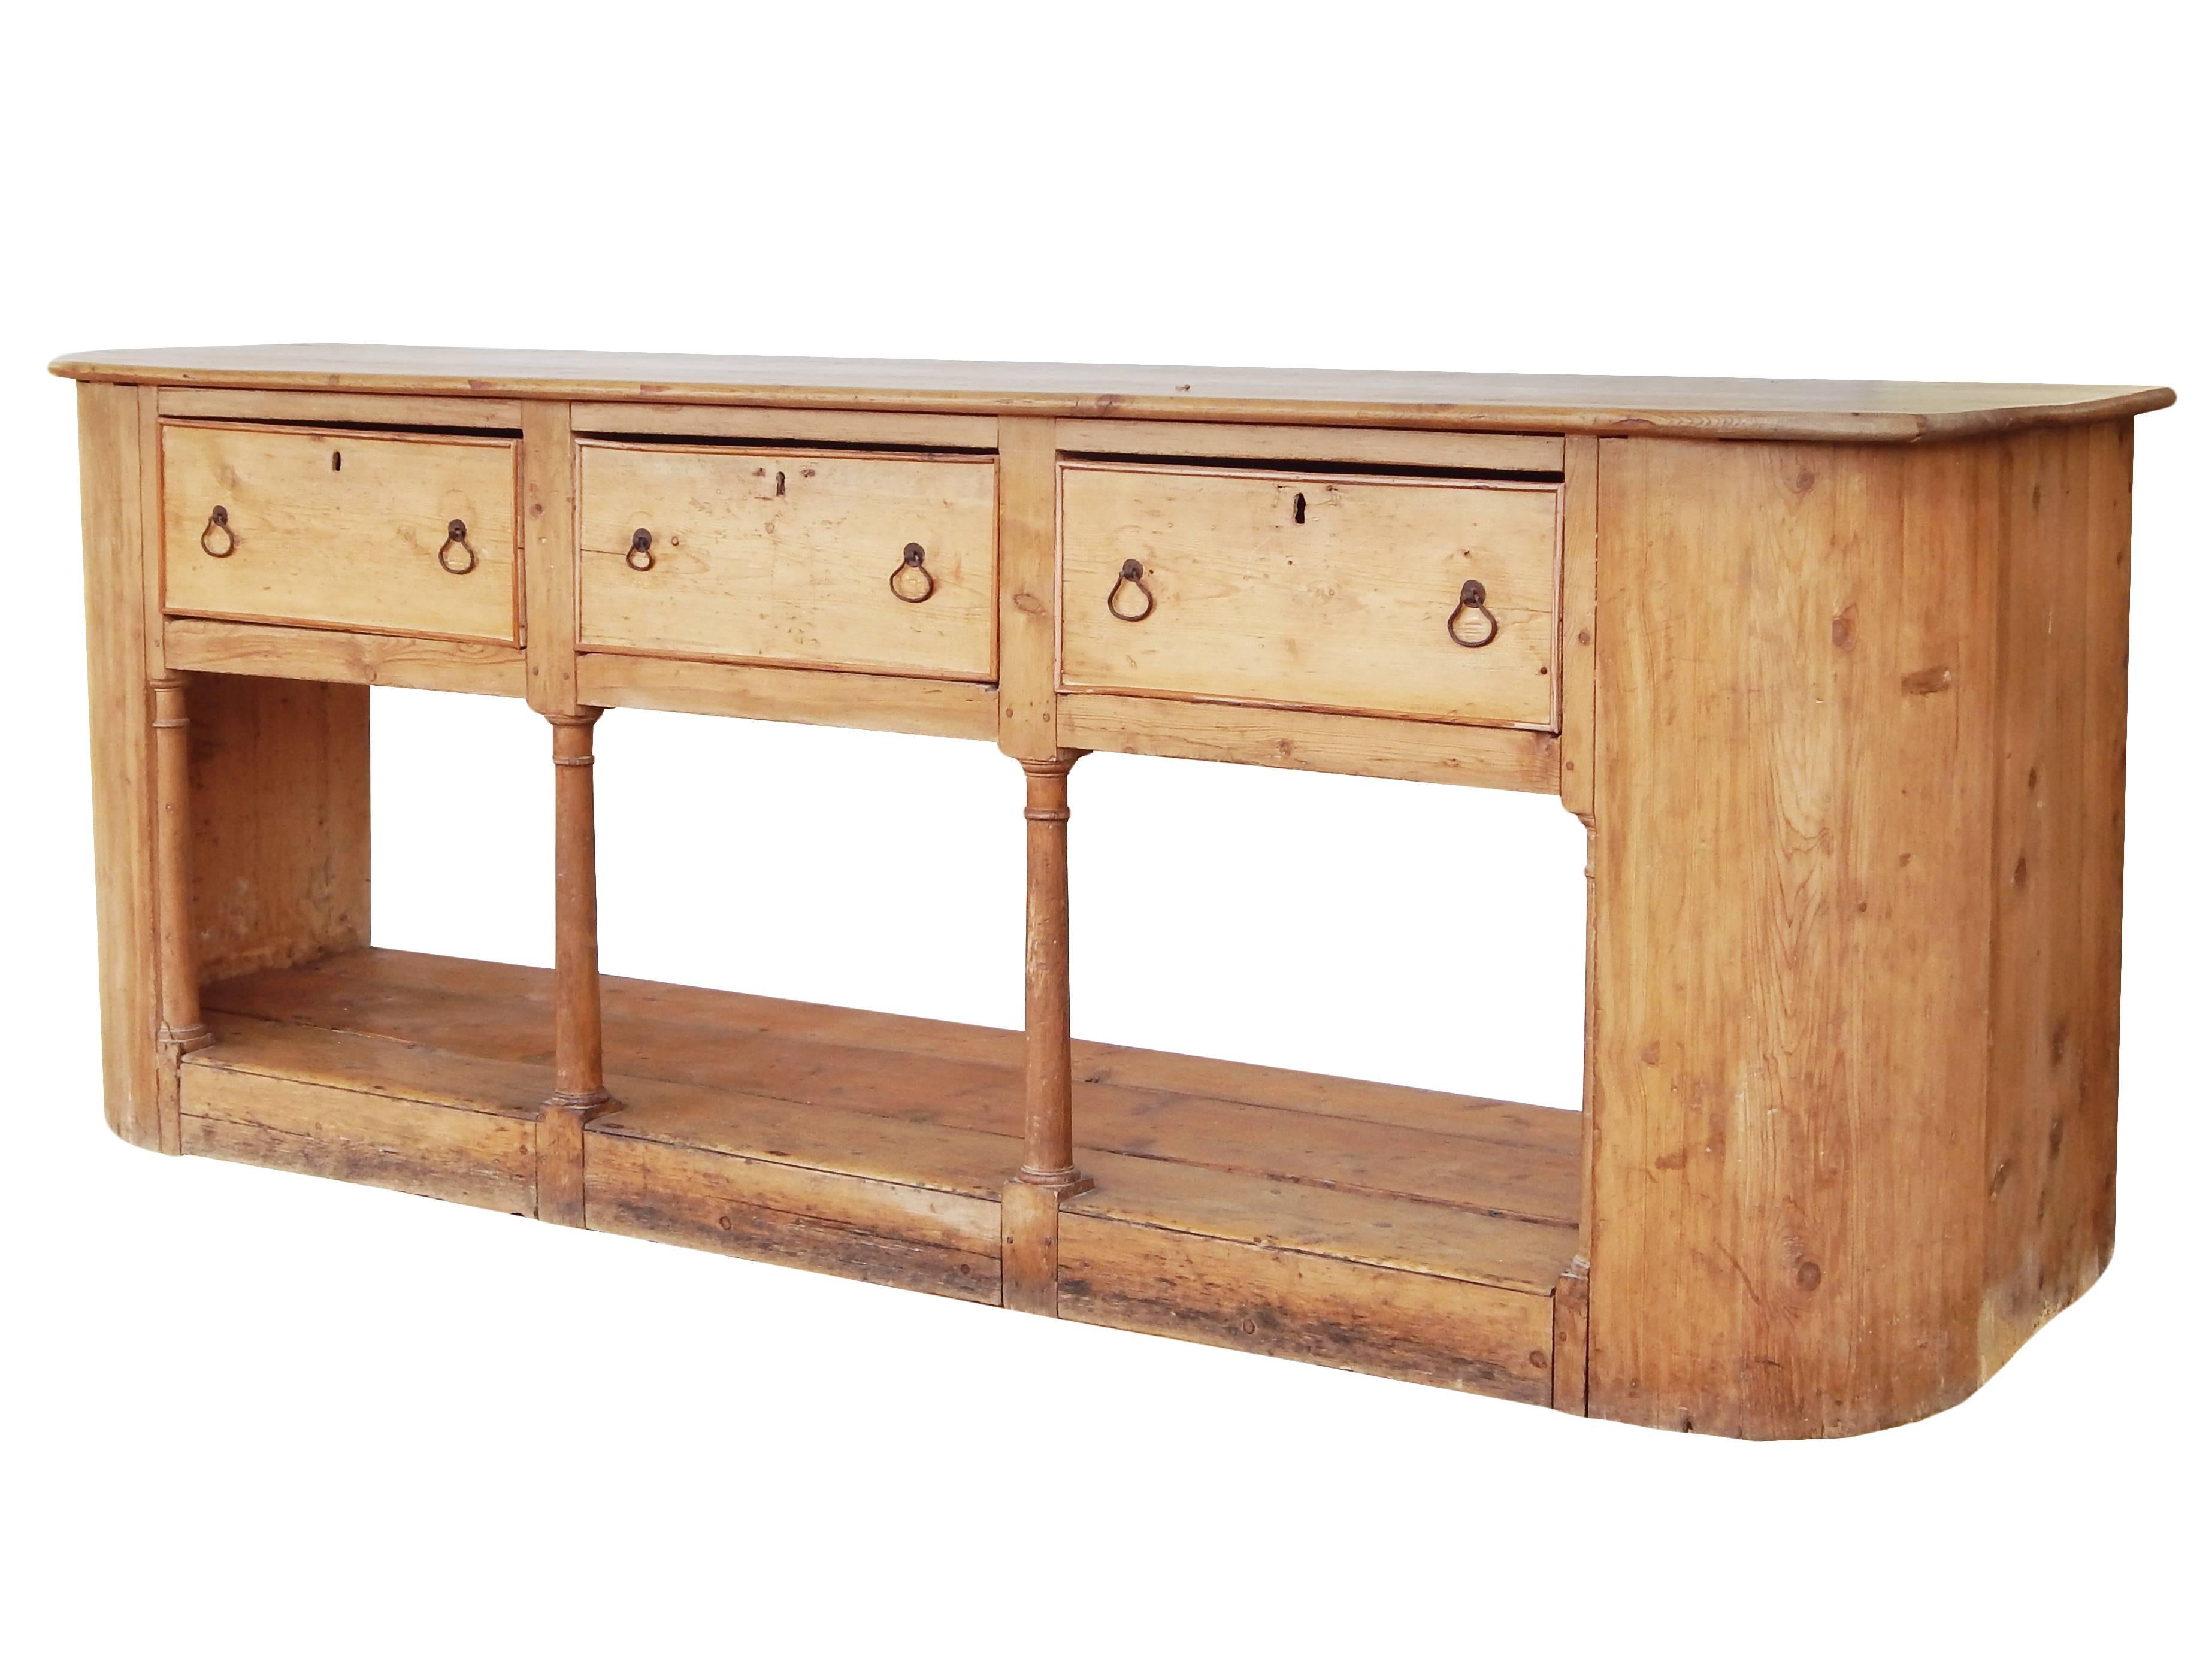 Exceptional English pine sideboard with curved end panels and carved columns. A back board can be made if the open back is not appropriate for the setting.